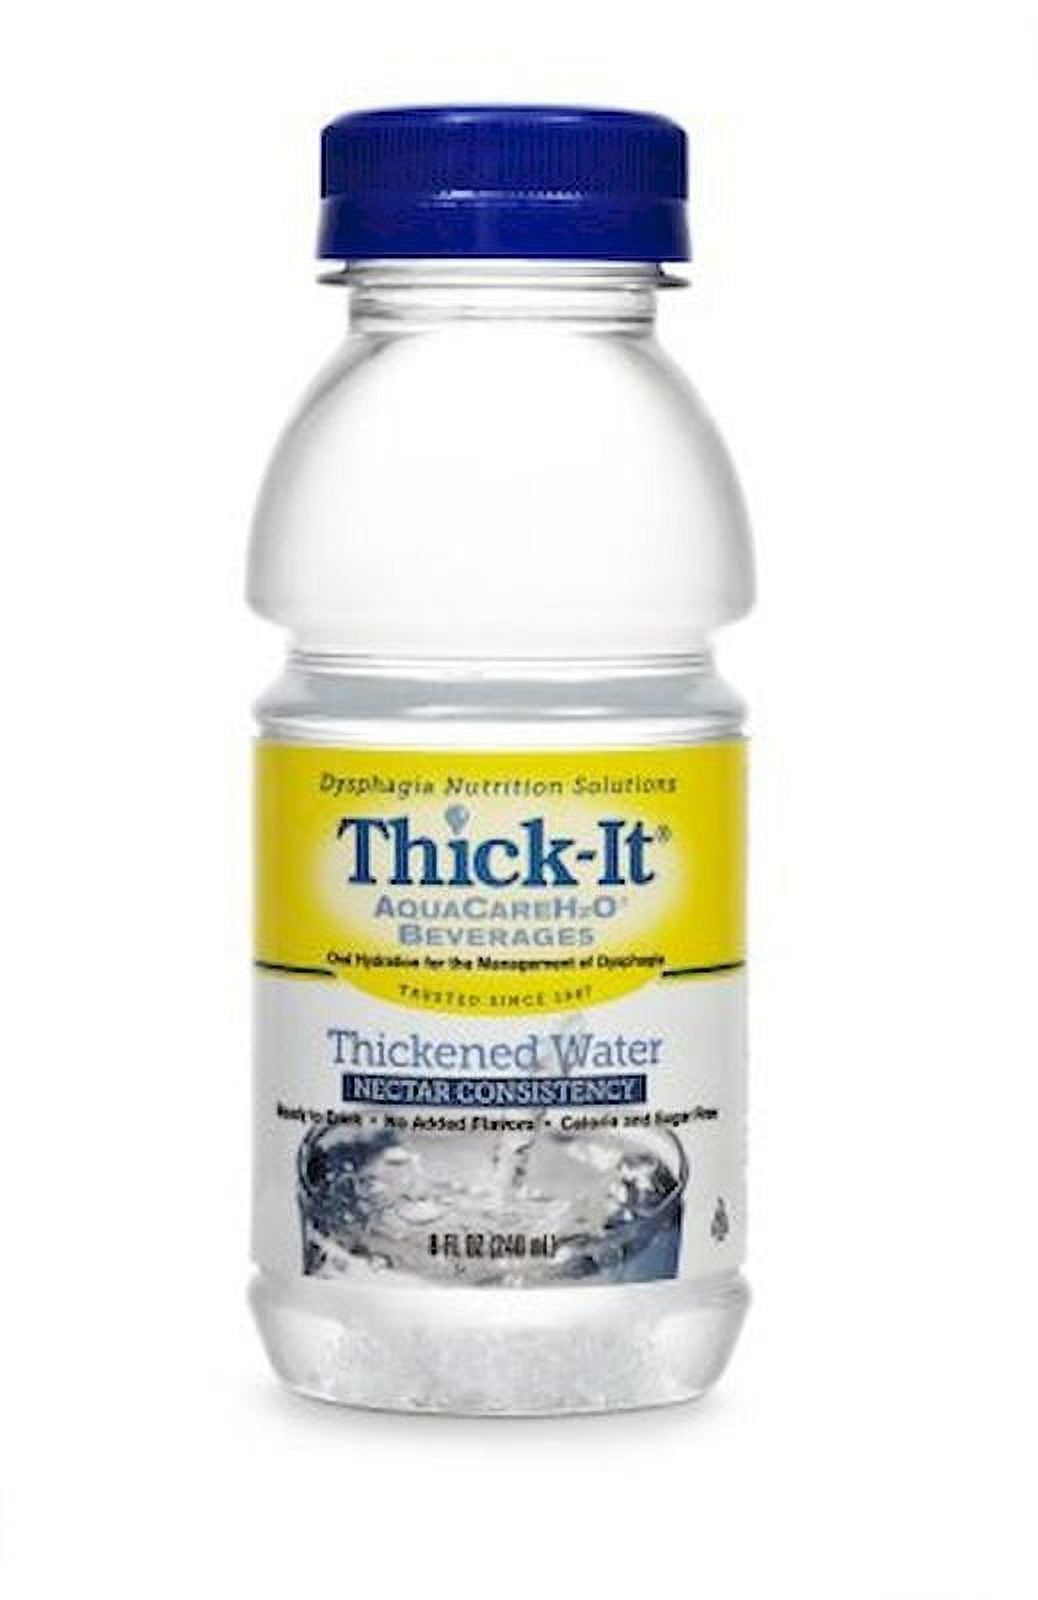 Thick-It AquaCareH20 Thickened Water B451 8 oz 1 Each, Unflavored